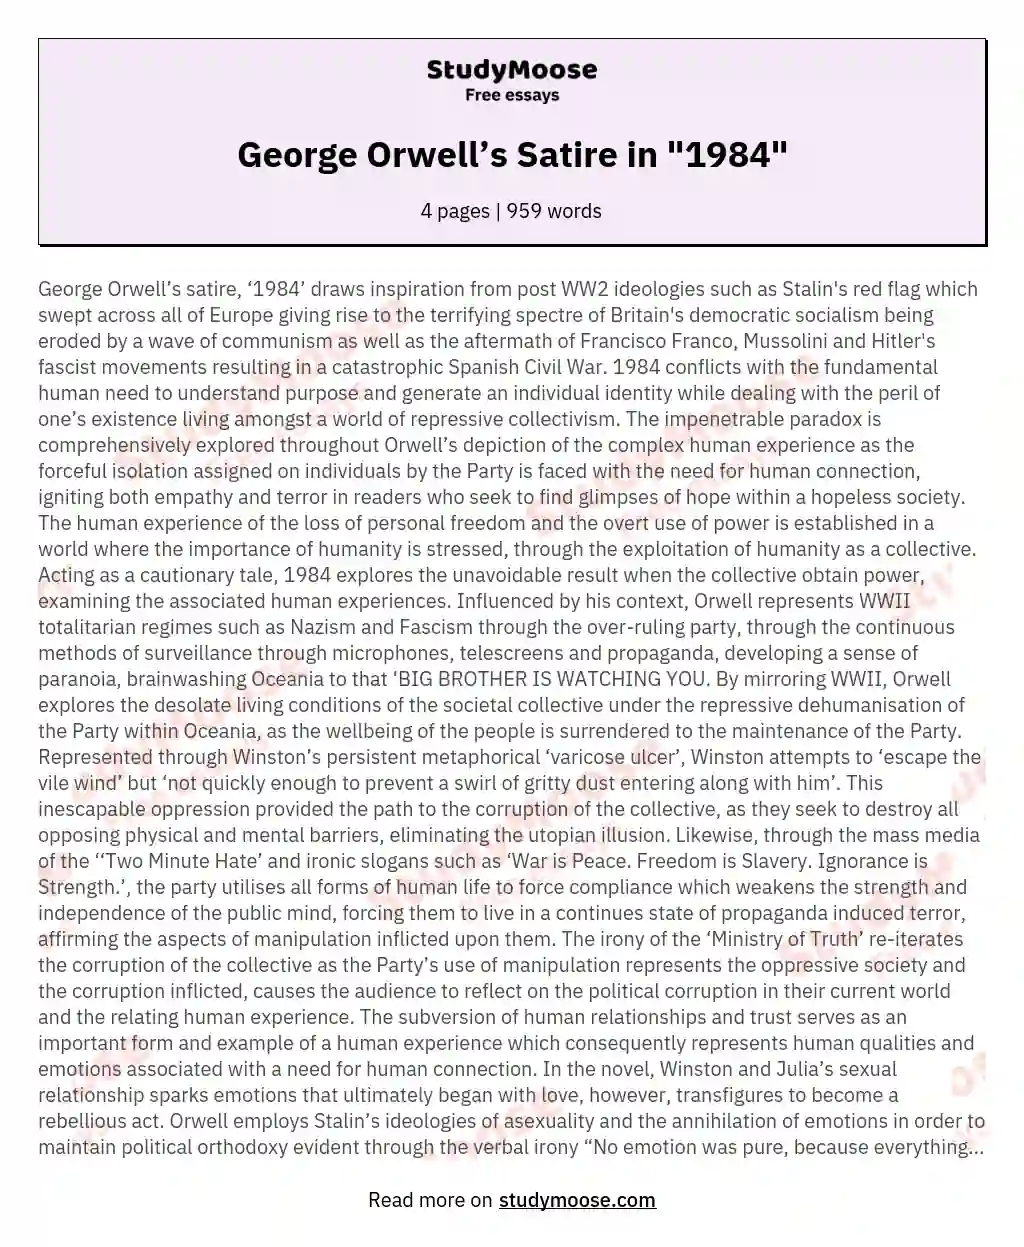 George Orwell’s Satire in "1984"